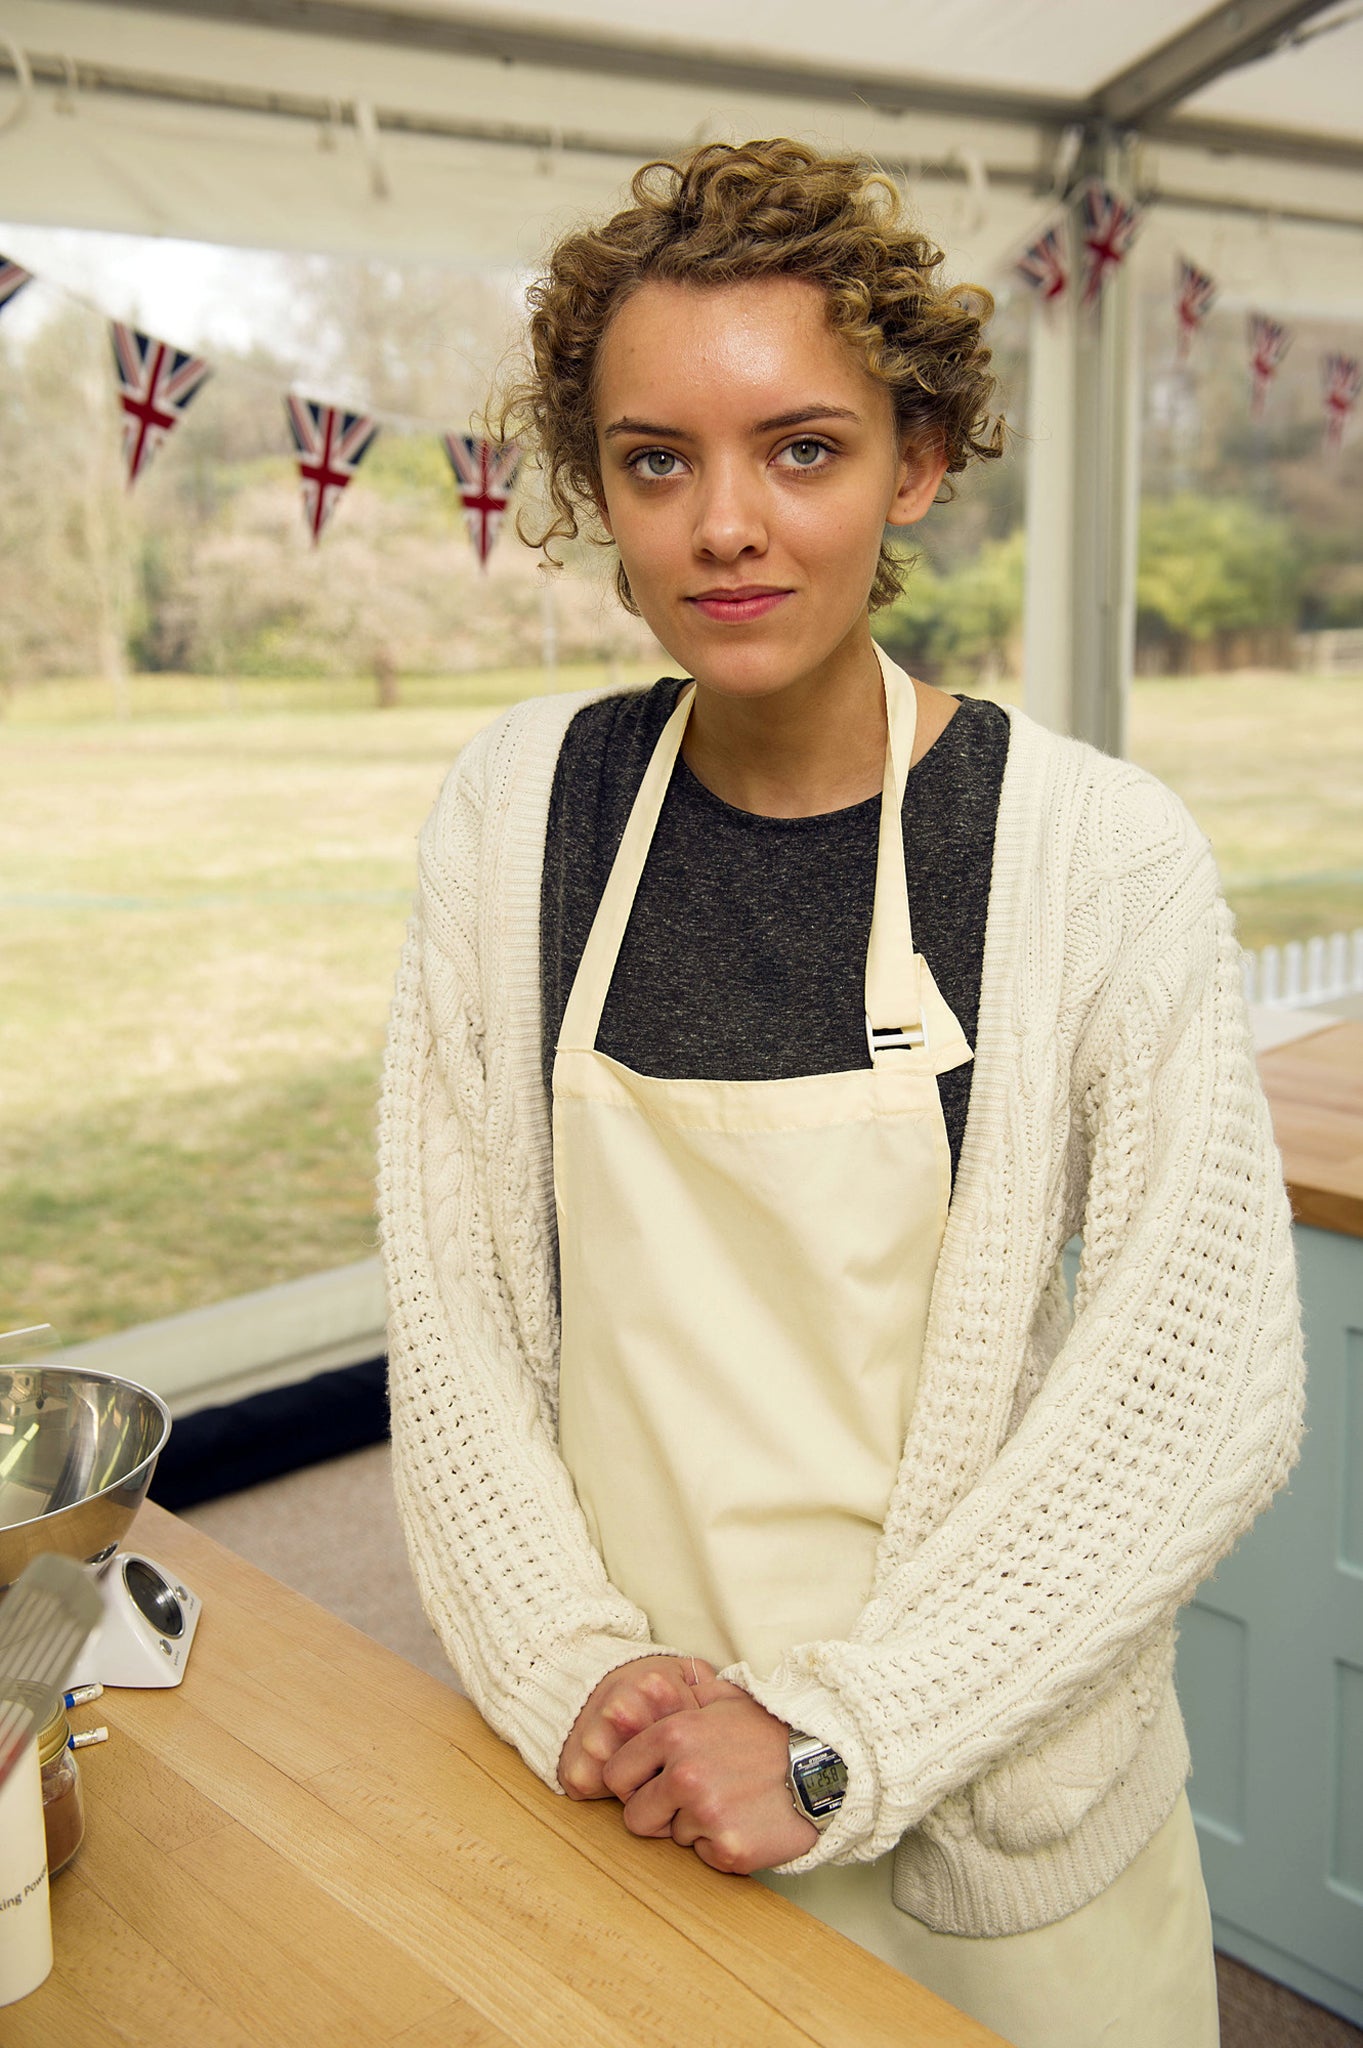 Great British Bake Off 2013 contestant Ruby Tandoh